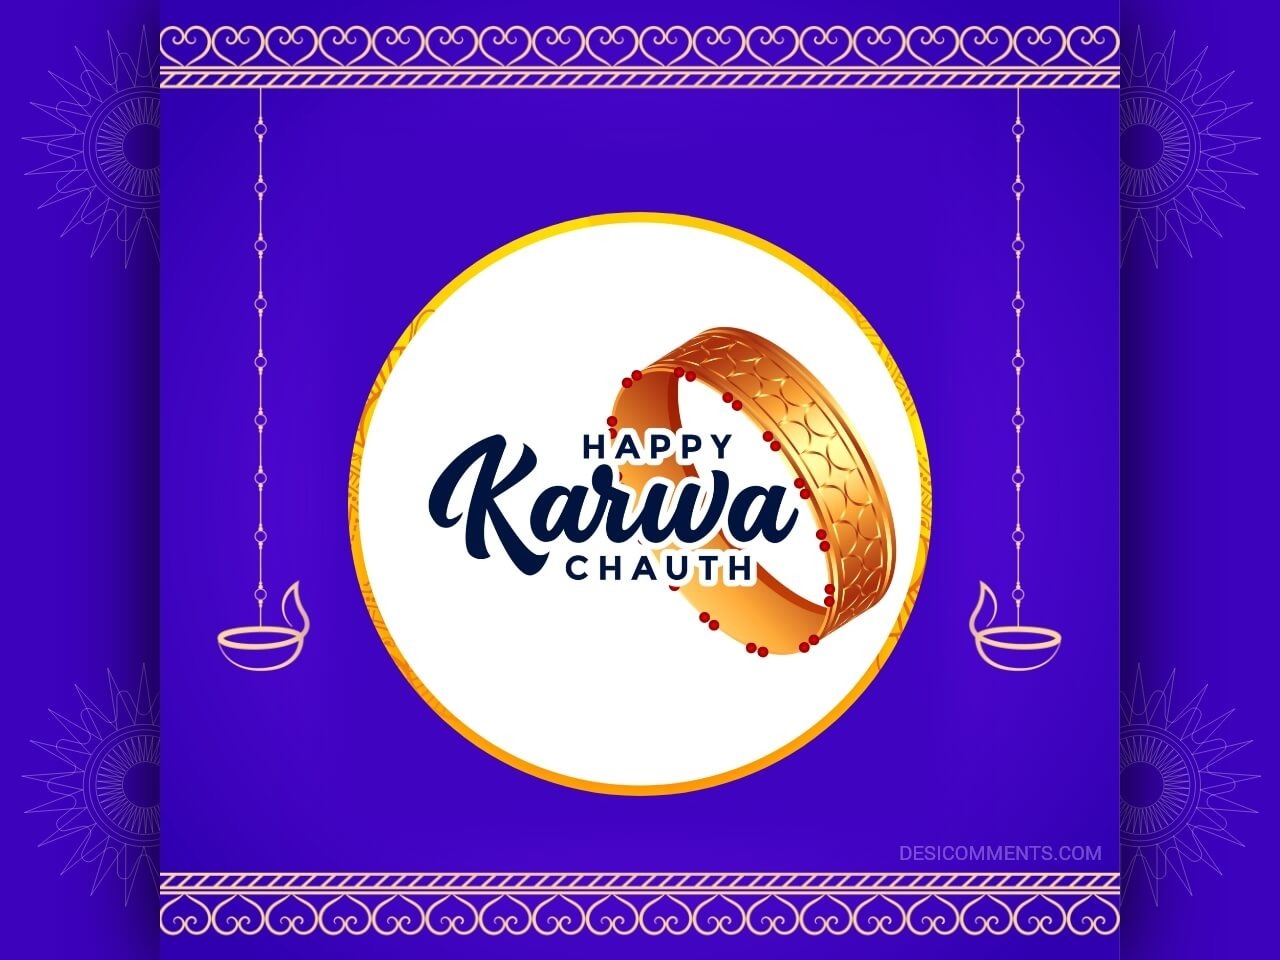 Happy Karva Chauth Images Wallpapers Pictures  Photos 2018